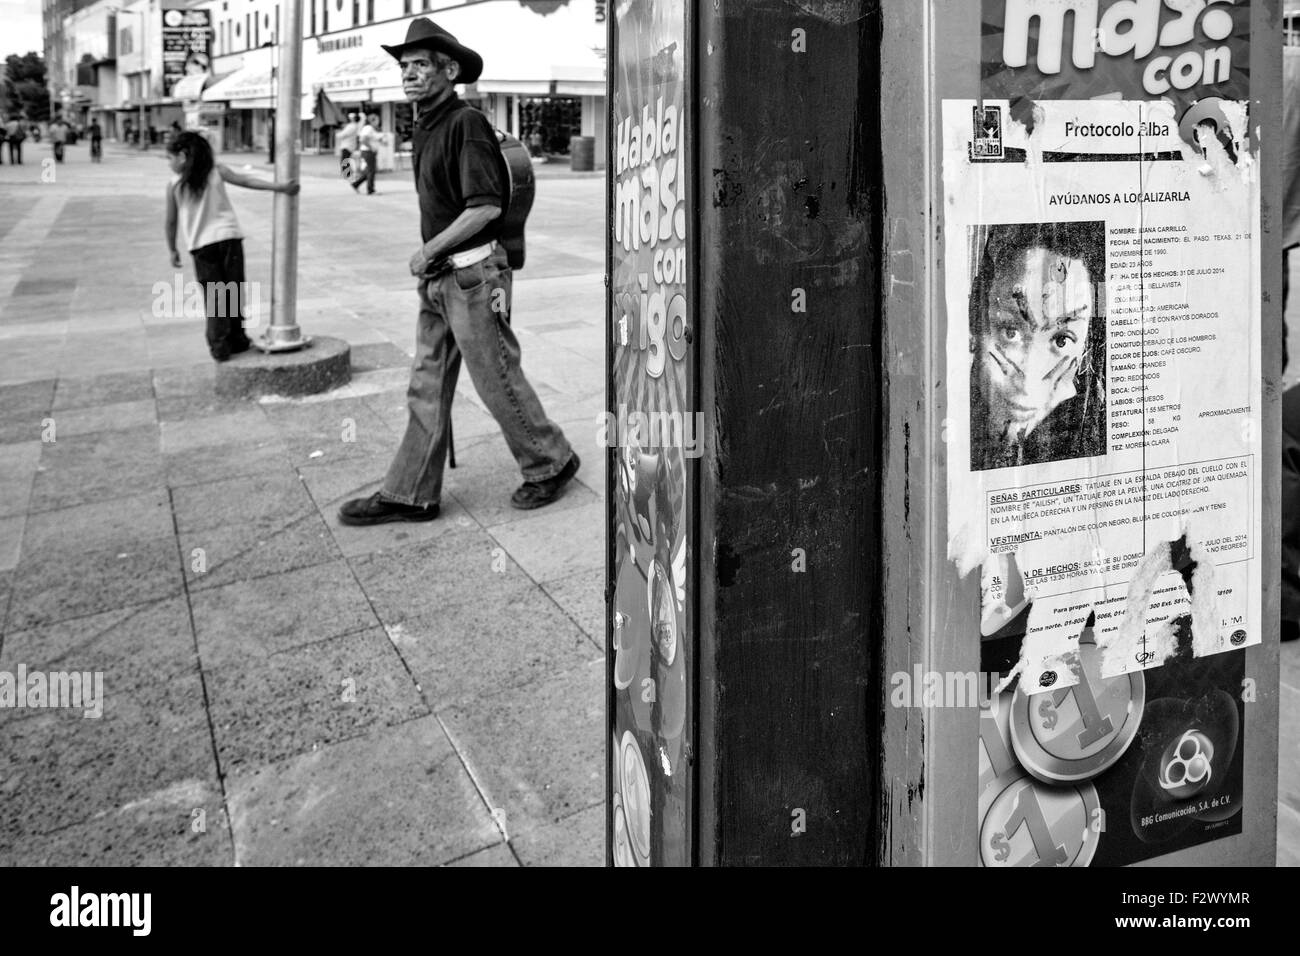 Ciudad Juarez, Mexico. 28th Sep, 2014. Downtown Juarez and a vandalized poster on a phone booth asking for information on the disappearance of Iliana Carillo, who went missing in 2014 at the age of 23. (Credit Image: © Gabriel Romero/zReportage.com via ZUMA Press) Stock Photo